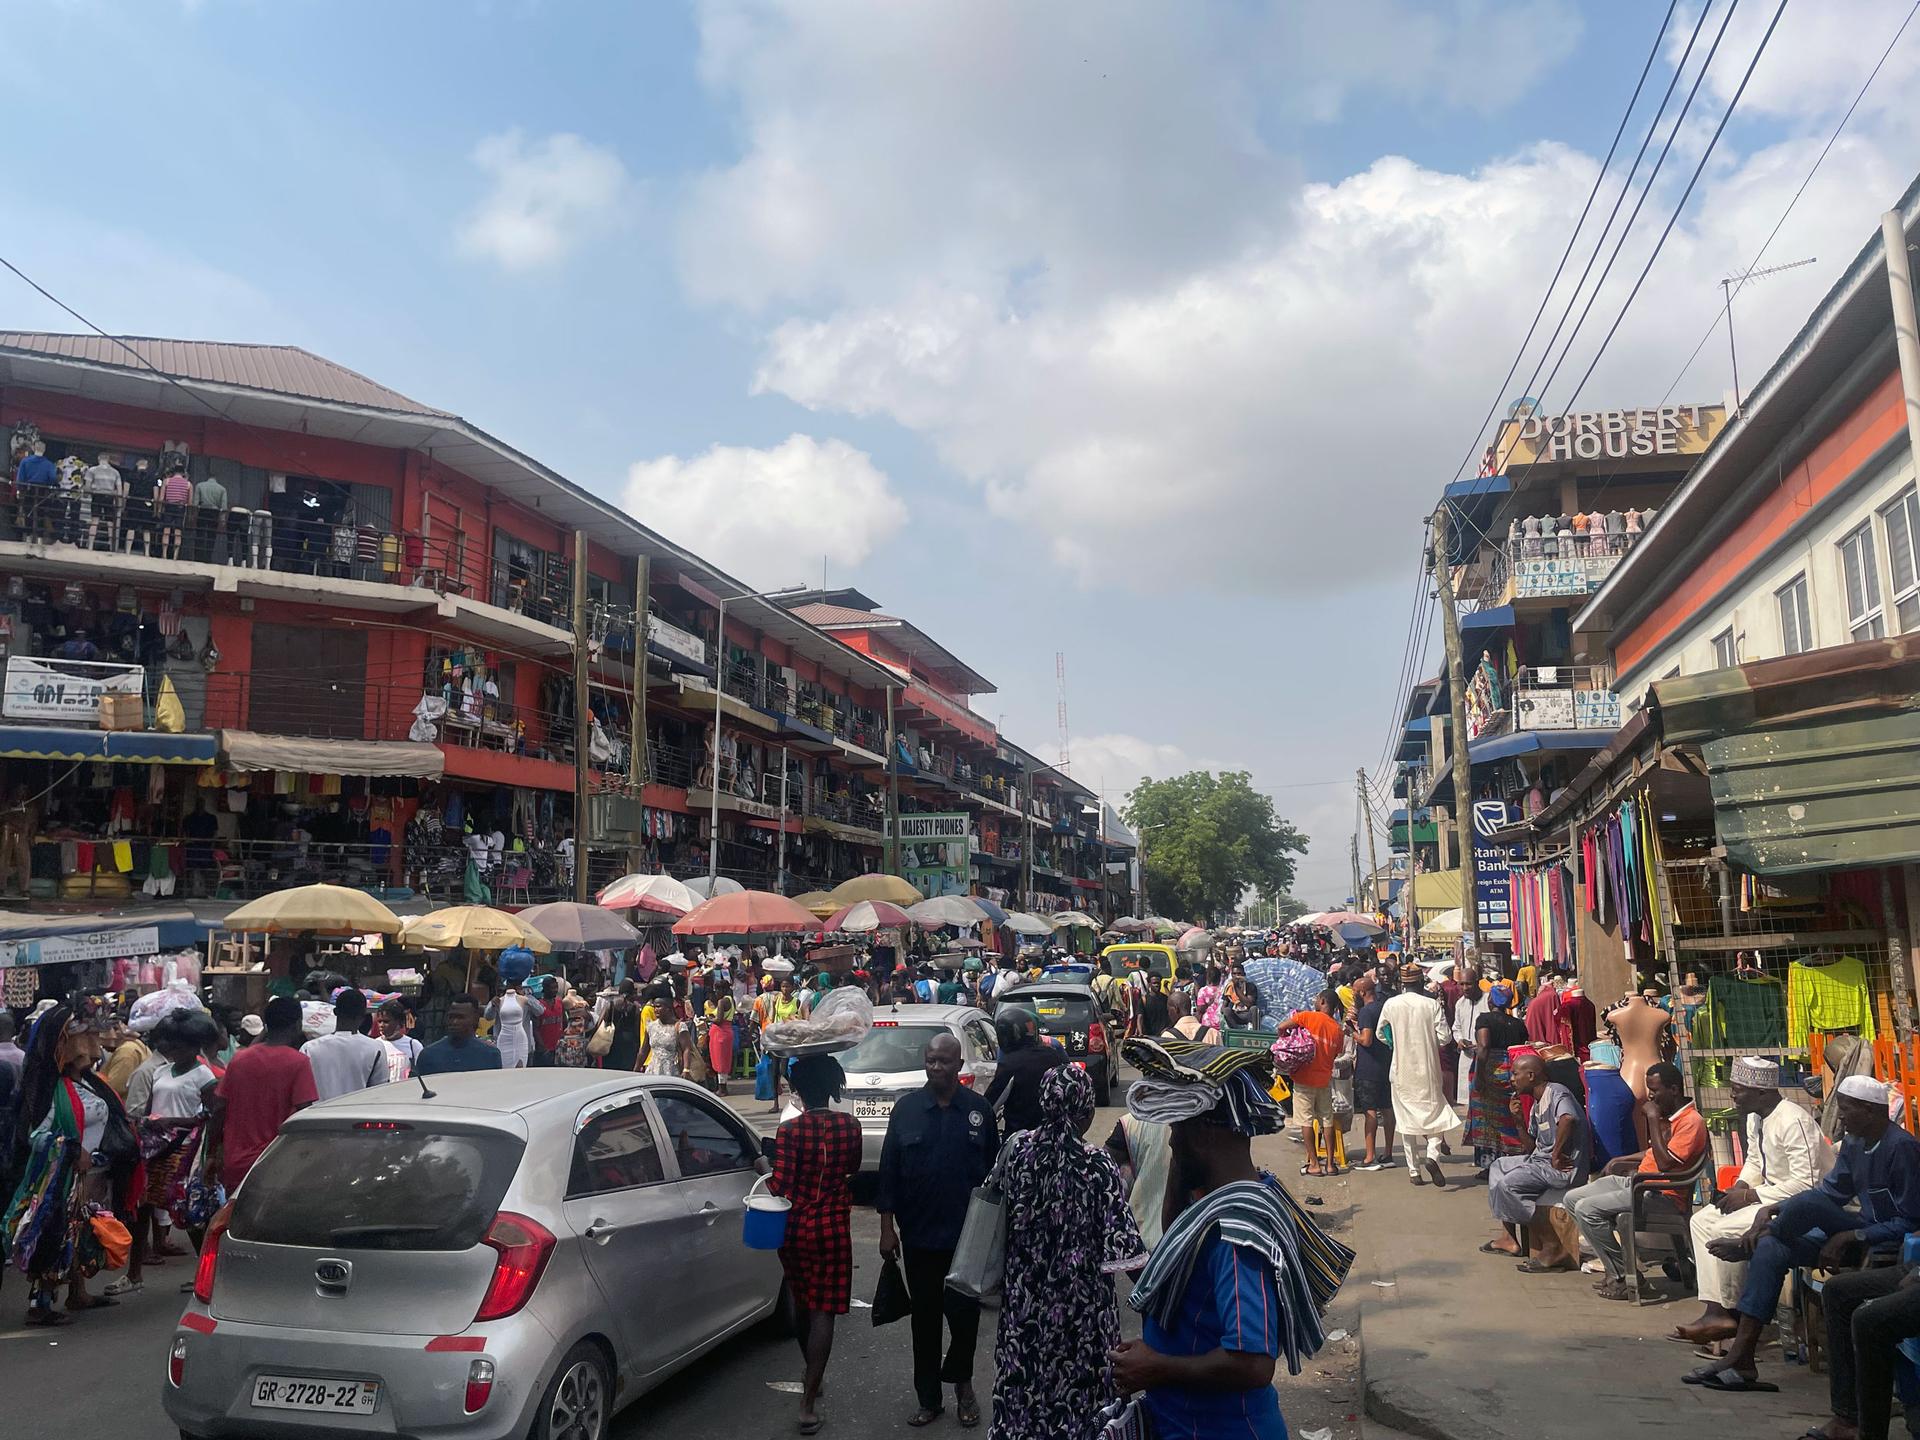 This is a busy scene from the central business district in Accra, Ghana.